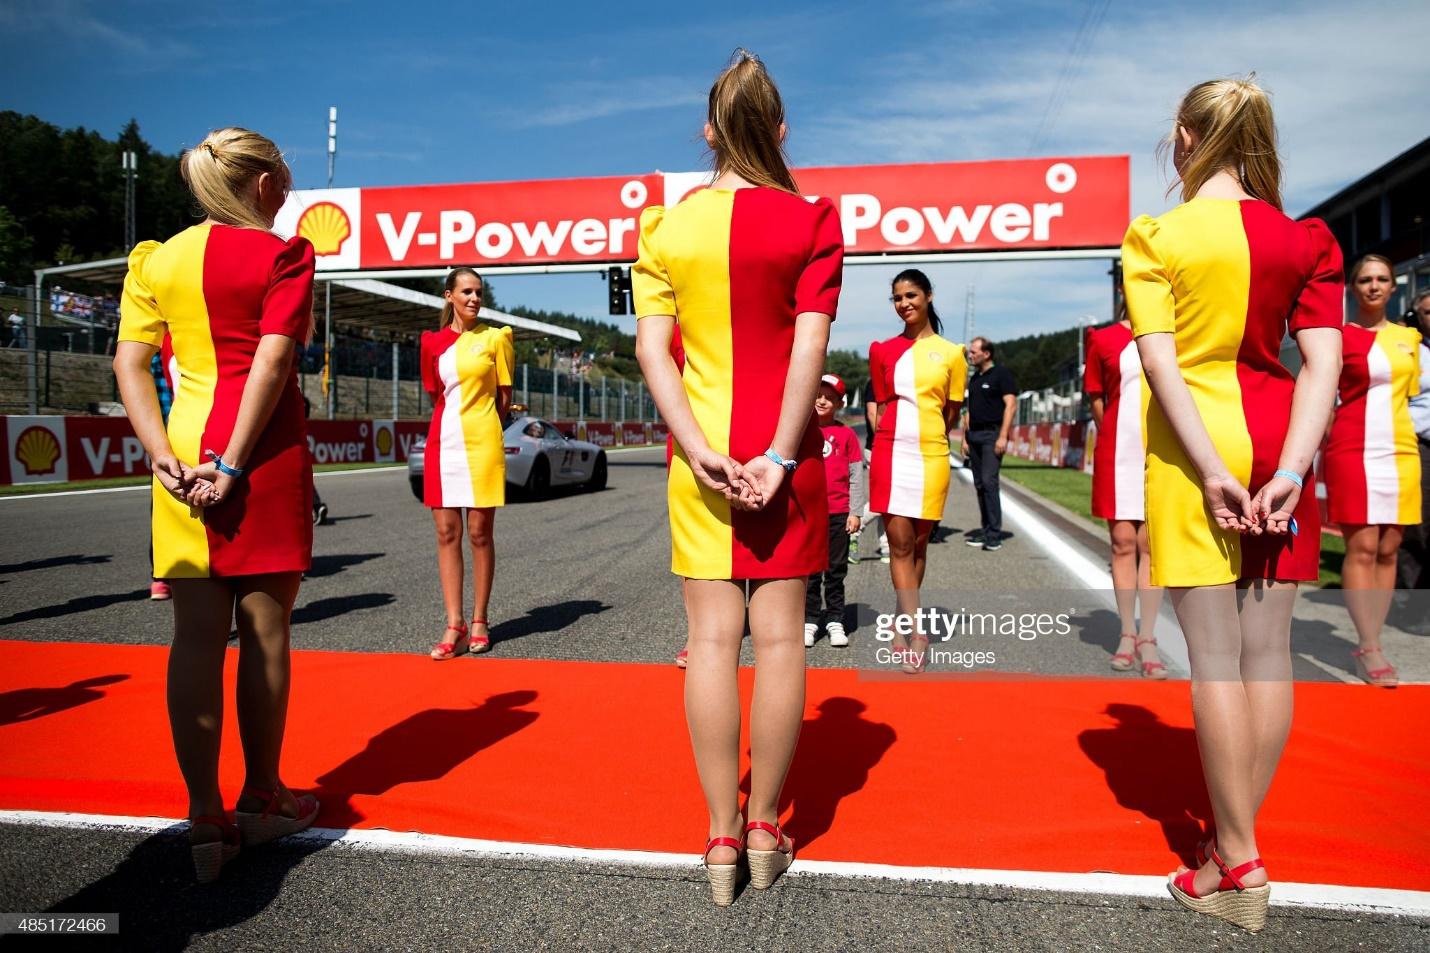 D:\Documenti\posts\posts\Women and motorsport\foto\Getty e altre\grid-girls-pose-on-the-grid-before-the-formula-one-grand-prix-of-at-picture-id485172466.jpg